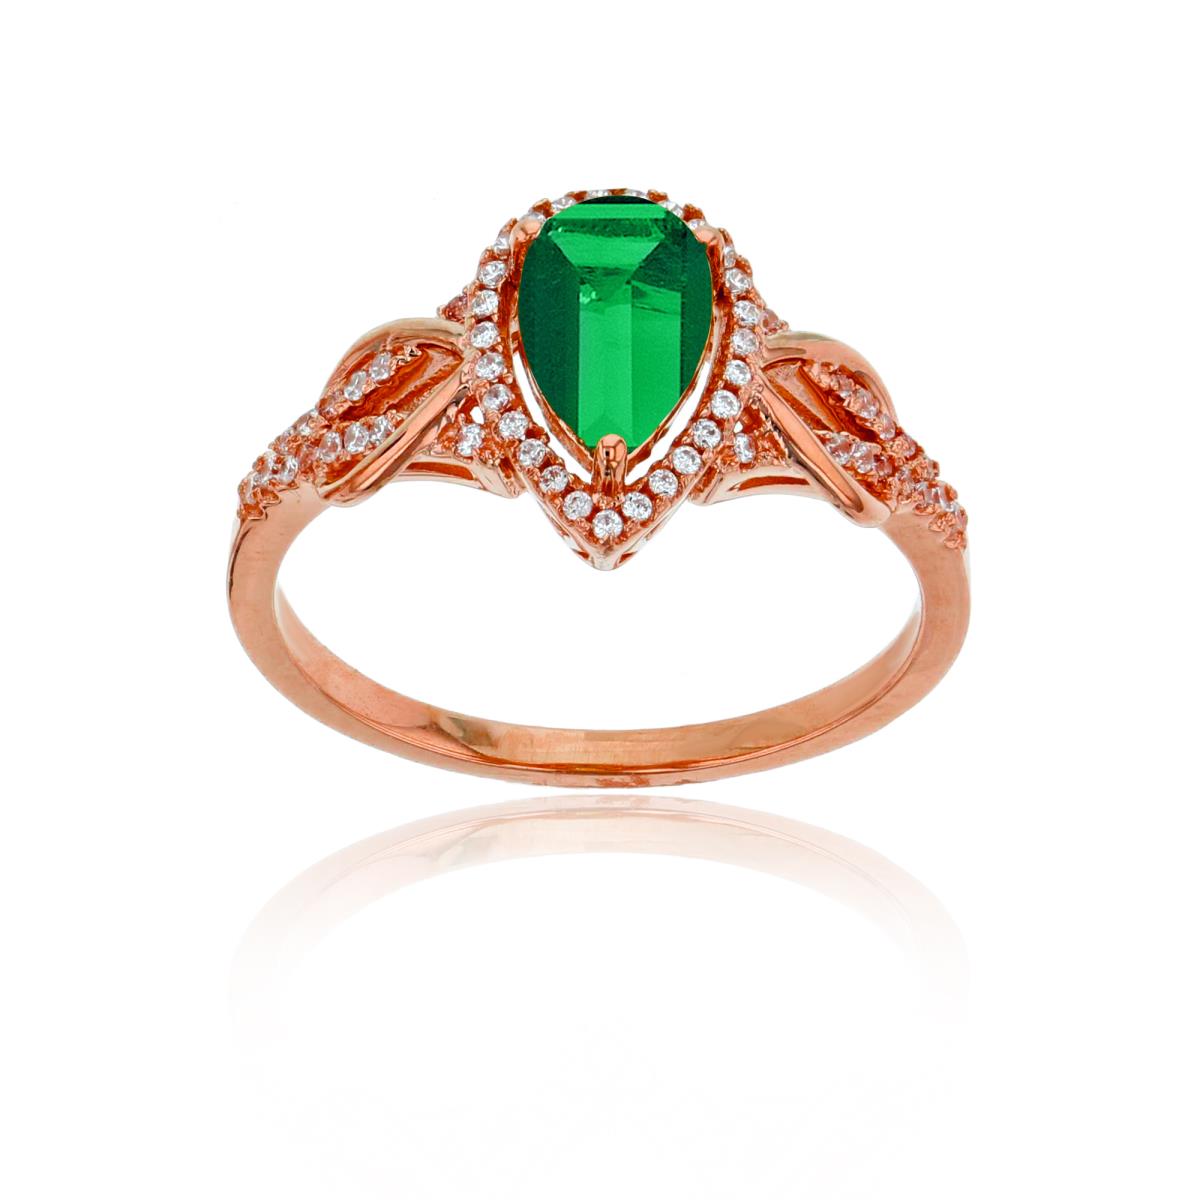 14K Rose Gold 0.17CTTW Rnd Diamond & 8x5mm Pear Cut Created Emerald Knot Sides Ring